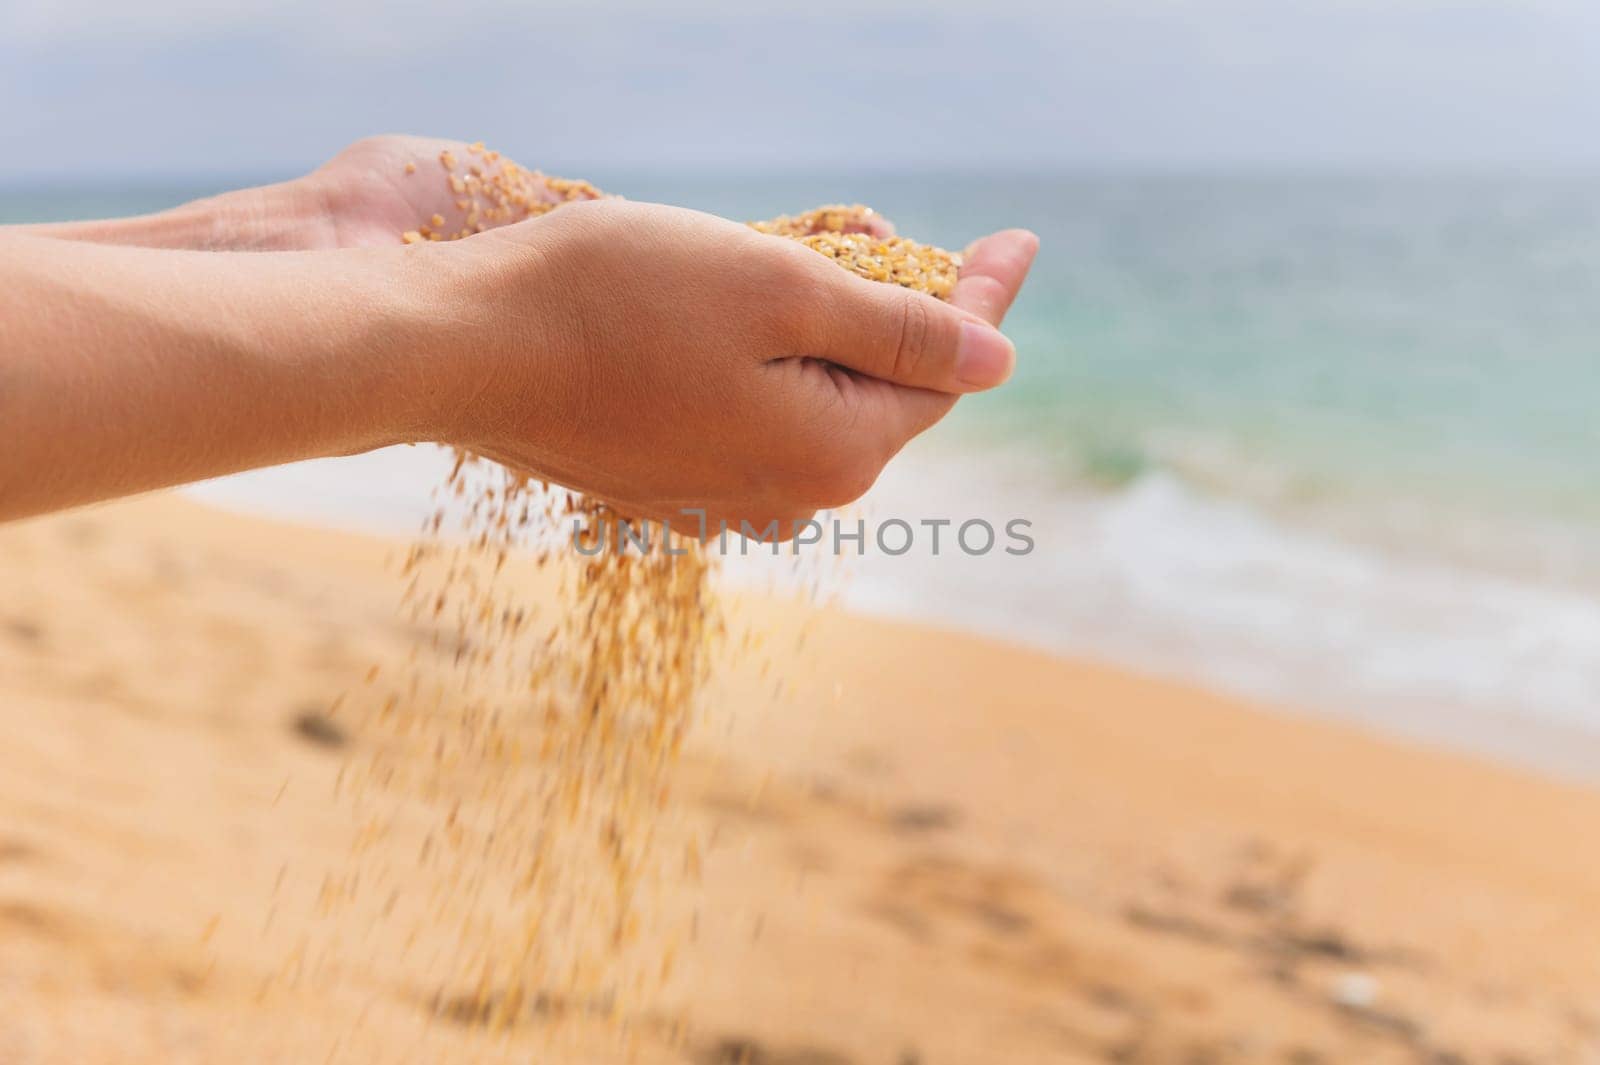 The hand releases the falling sand. Golden sand flows through your fingers on a sea background. Summer beach holiday and time passing concept by yanik88